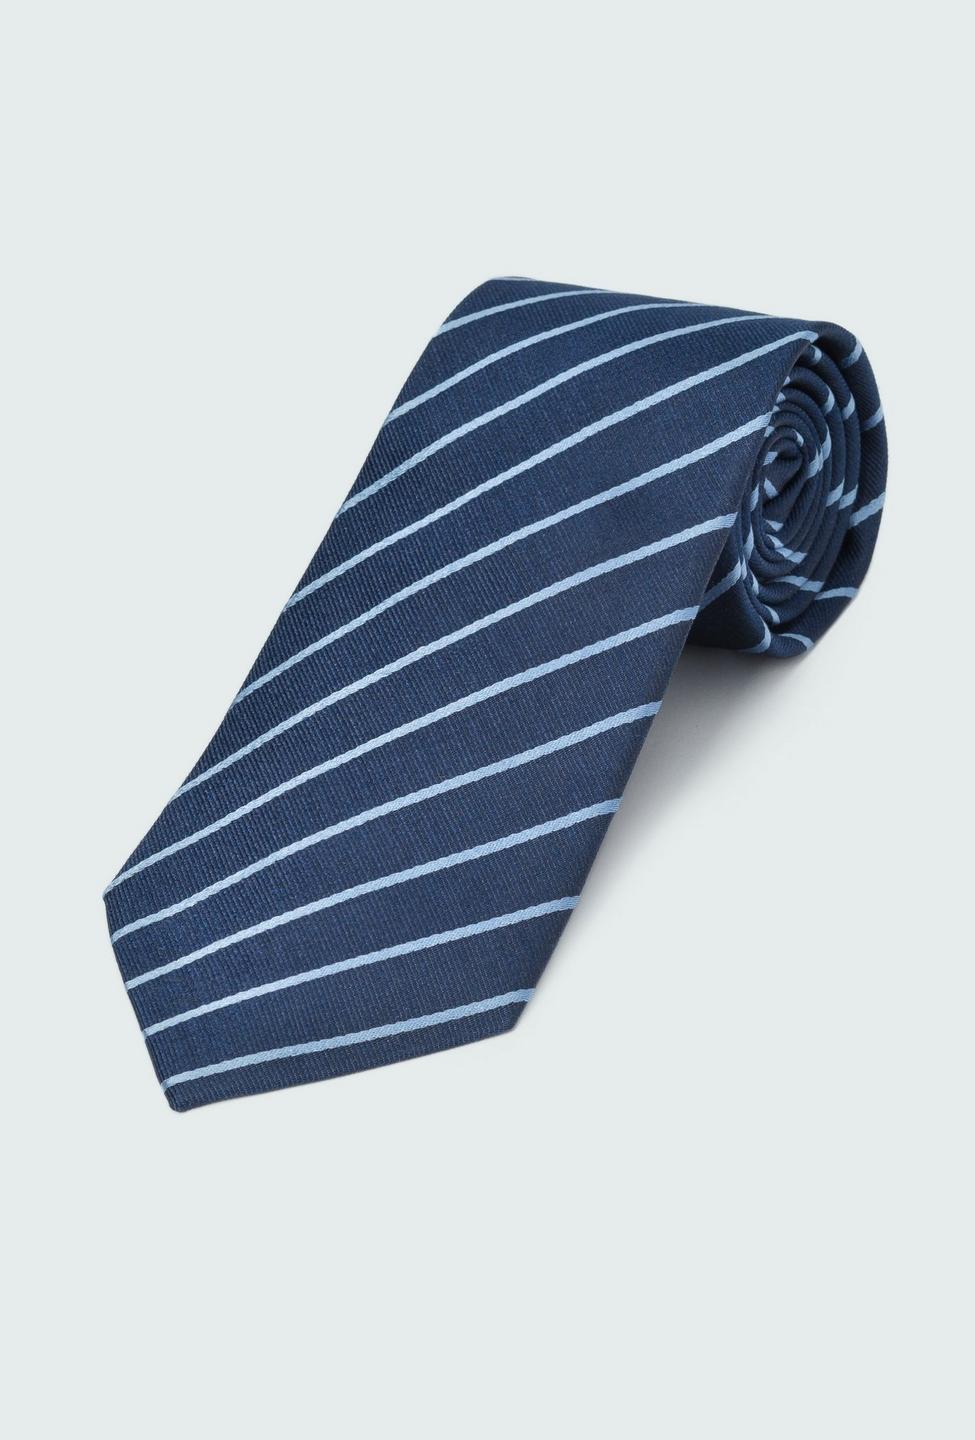 Navy tie - Striped Design from Indochino Collection